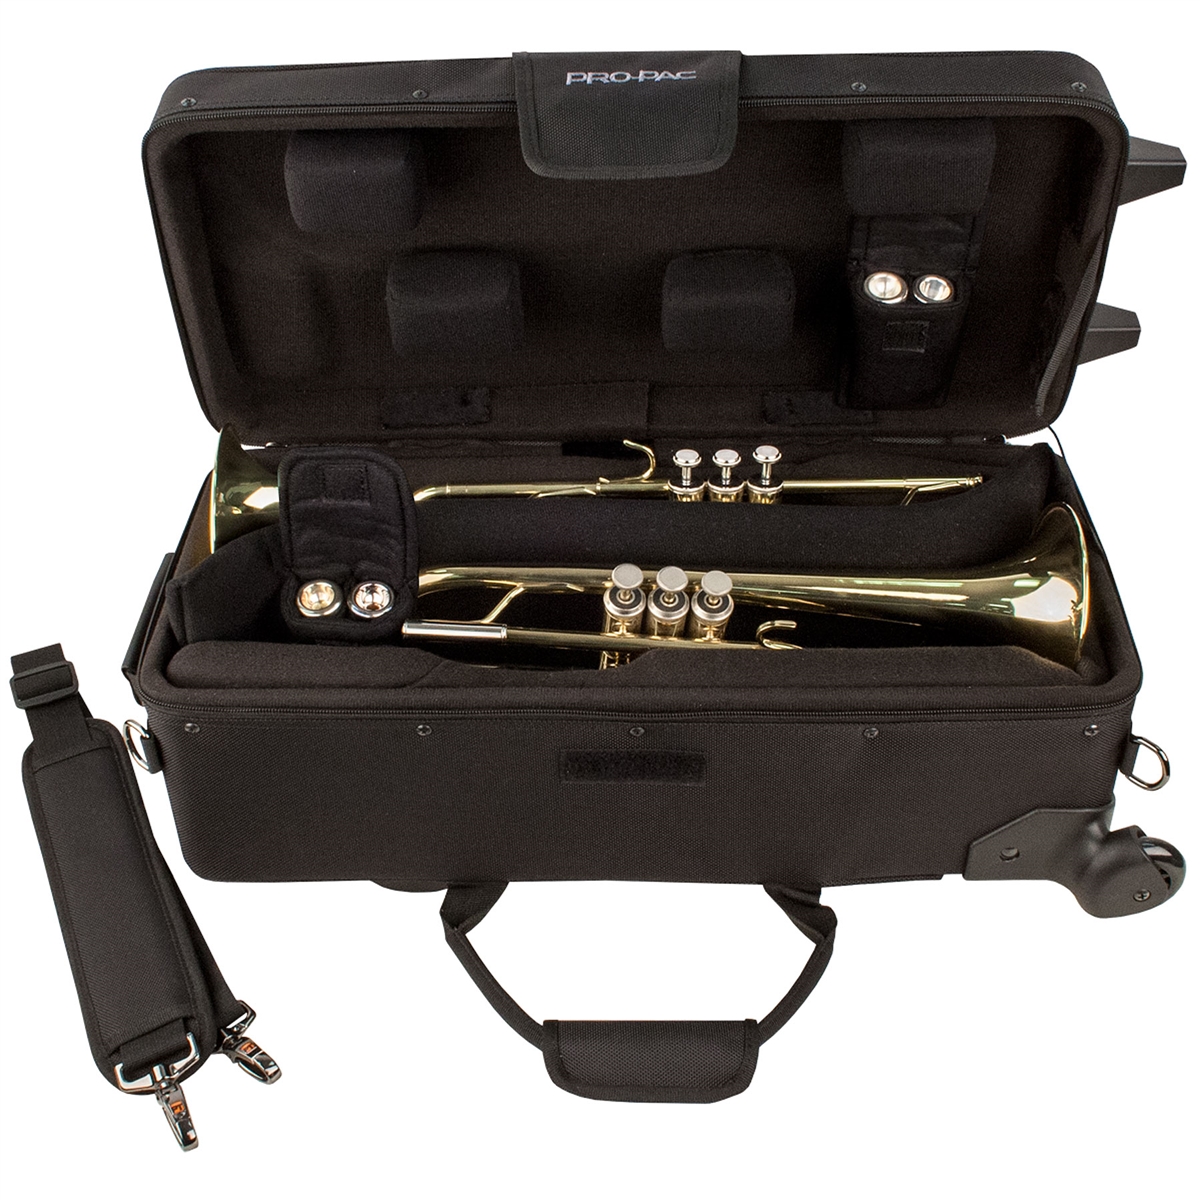 Protec IP301DWL Trolley-Case for 2 Trumpets